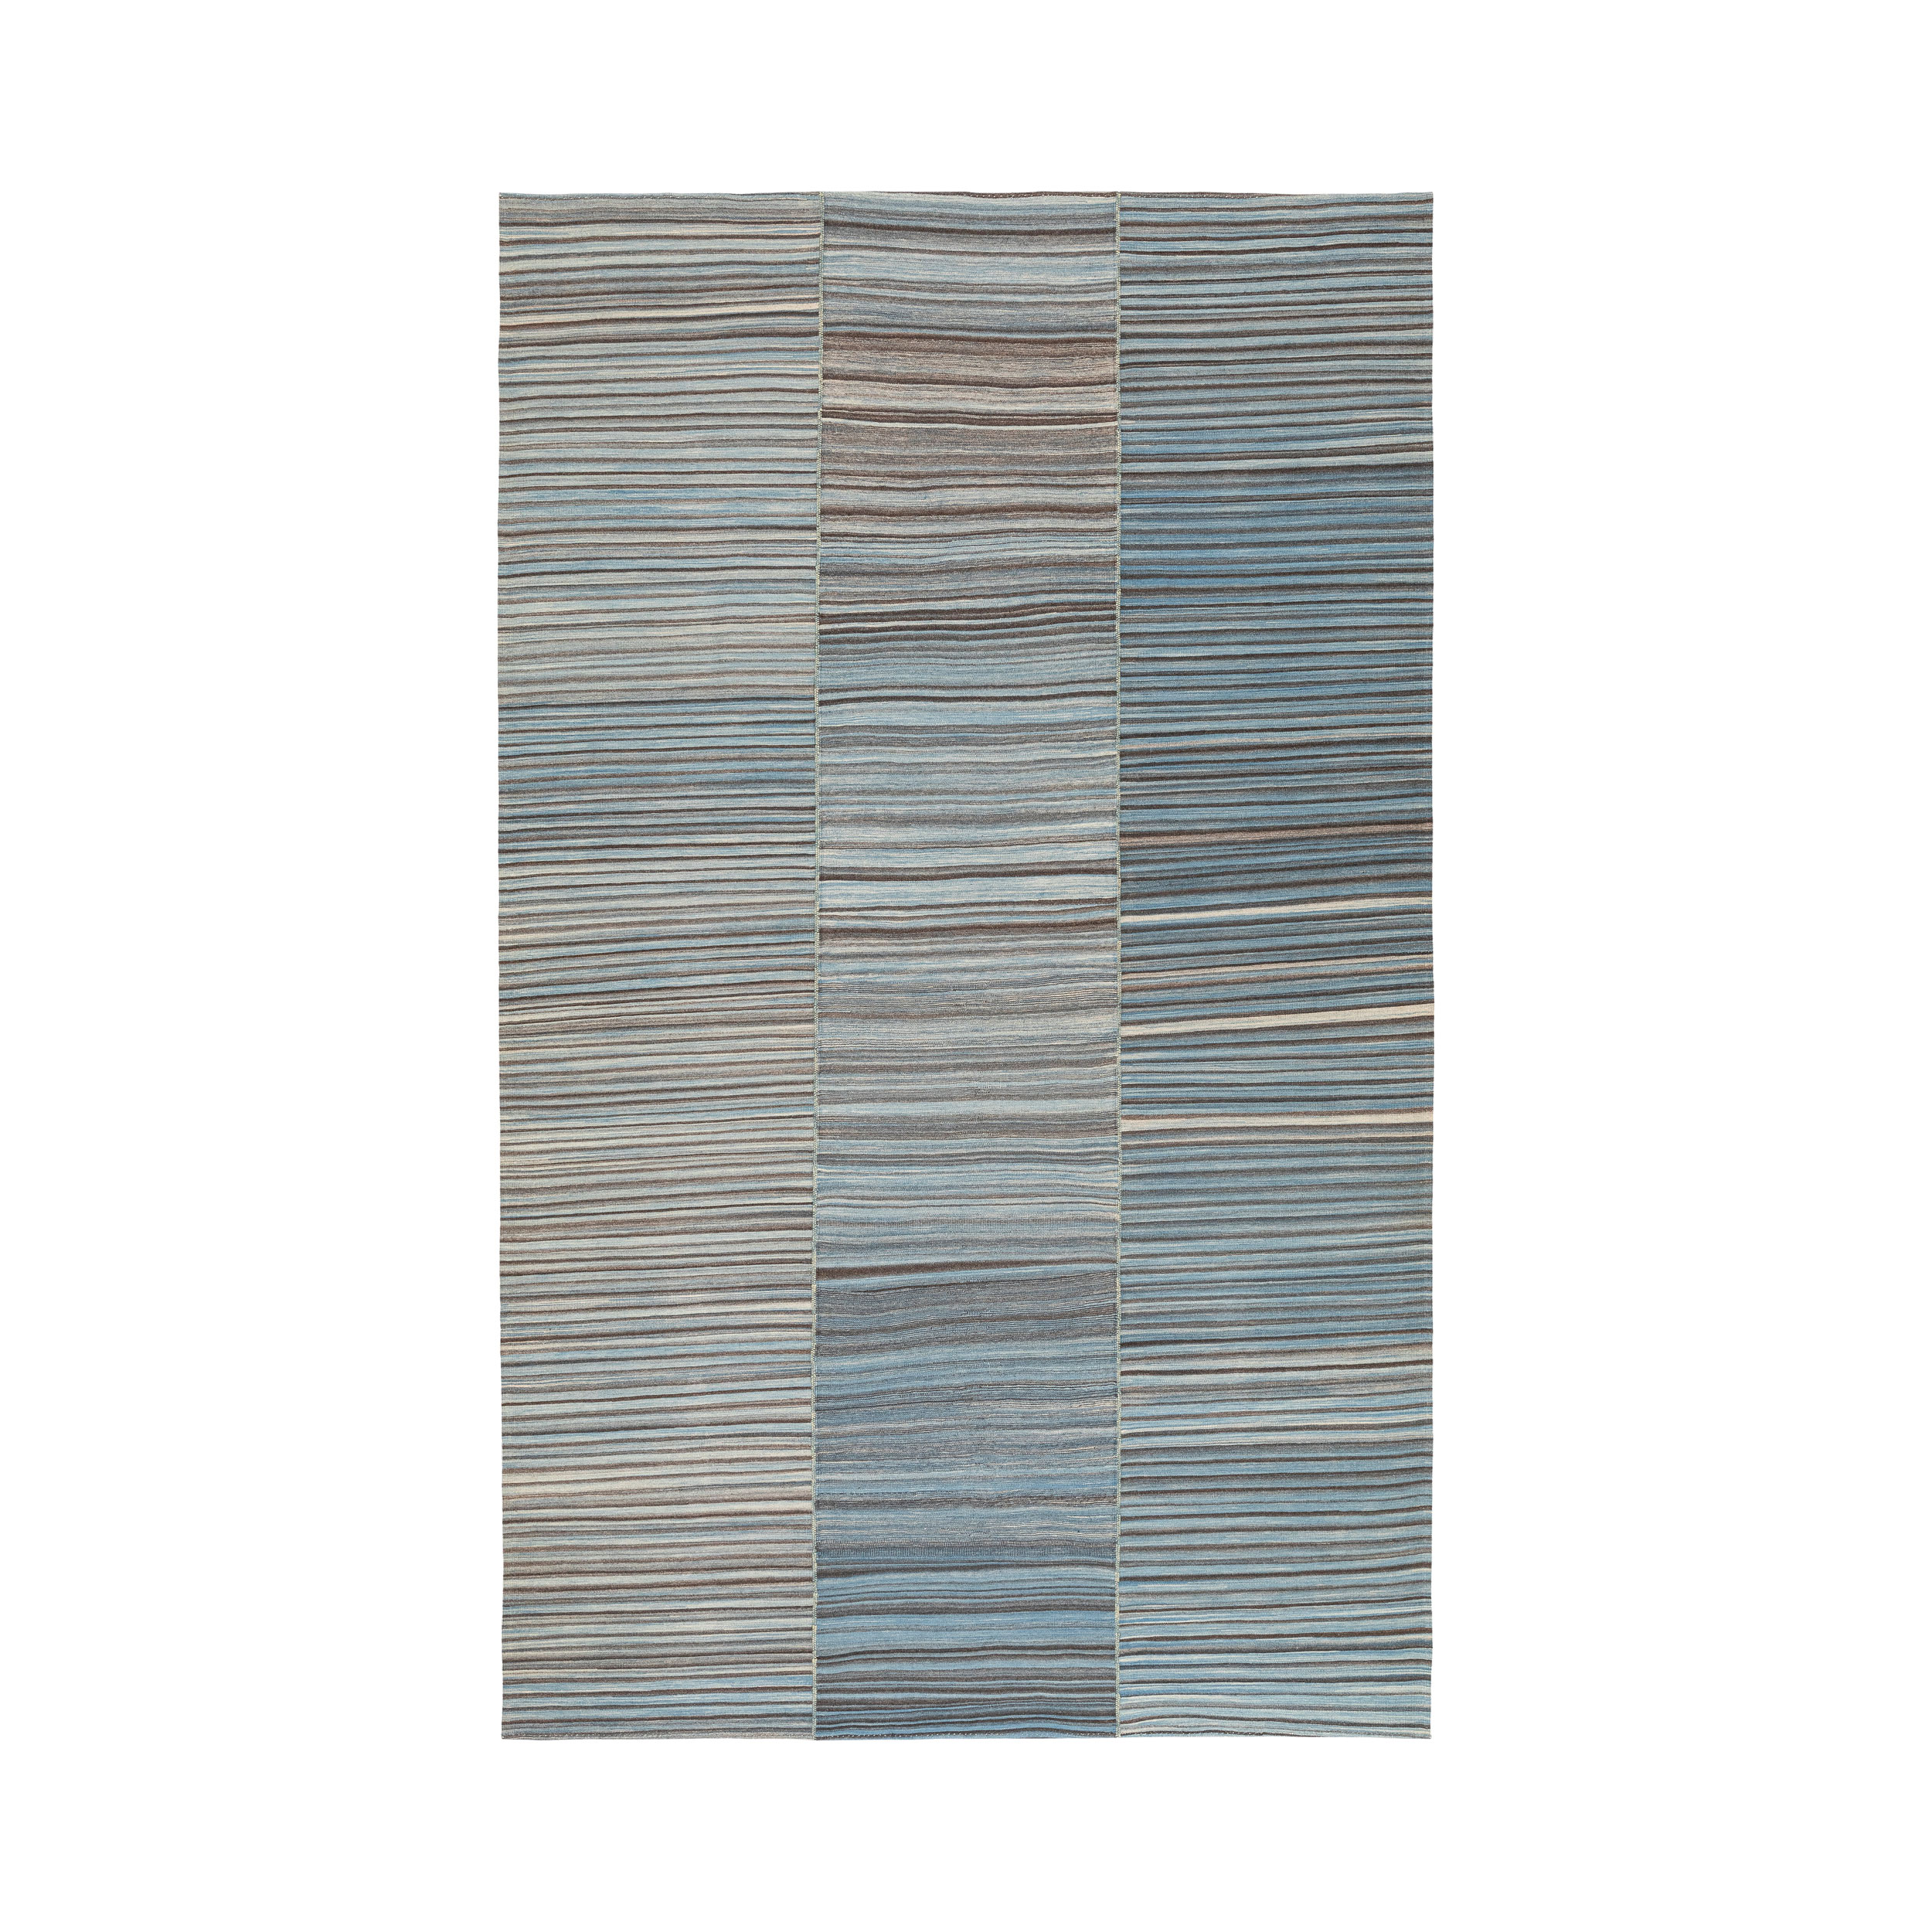 Pelas flatweave rug that is made with handspun wool and natural dyes. Inspired by Charmo kilims. 